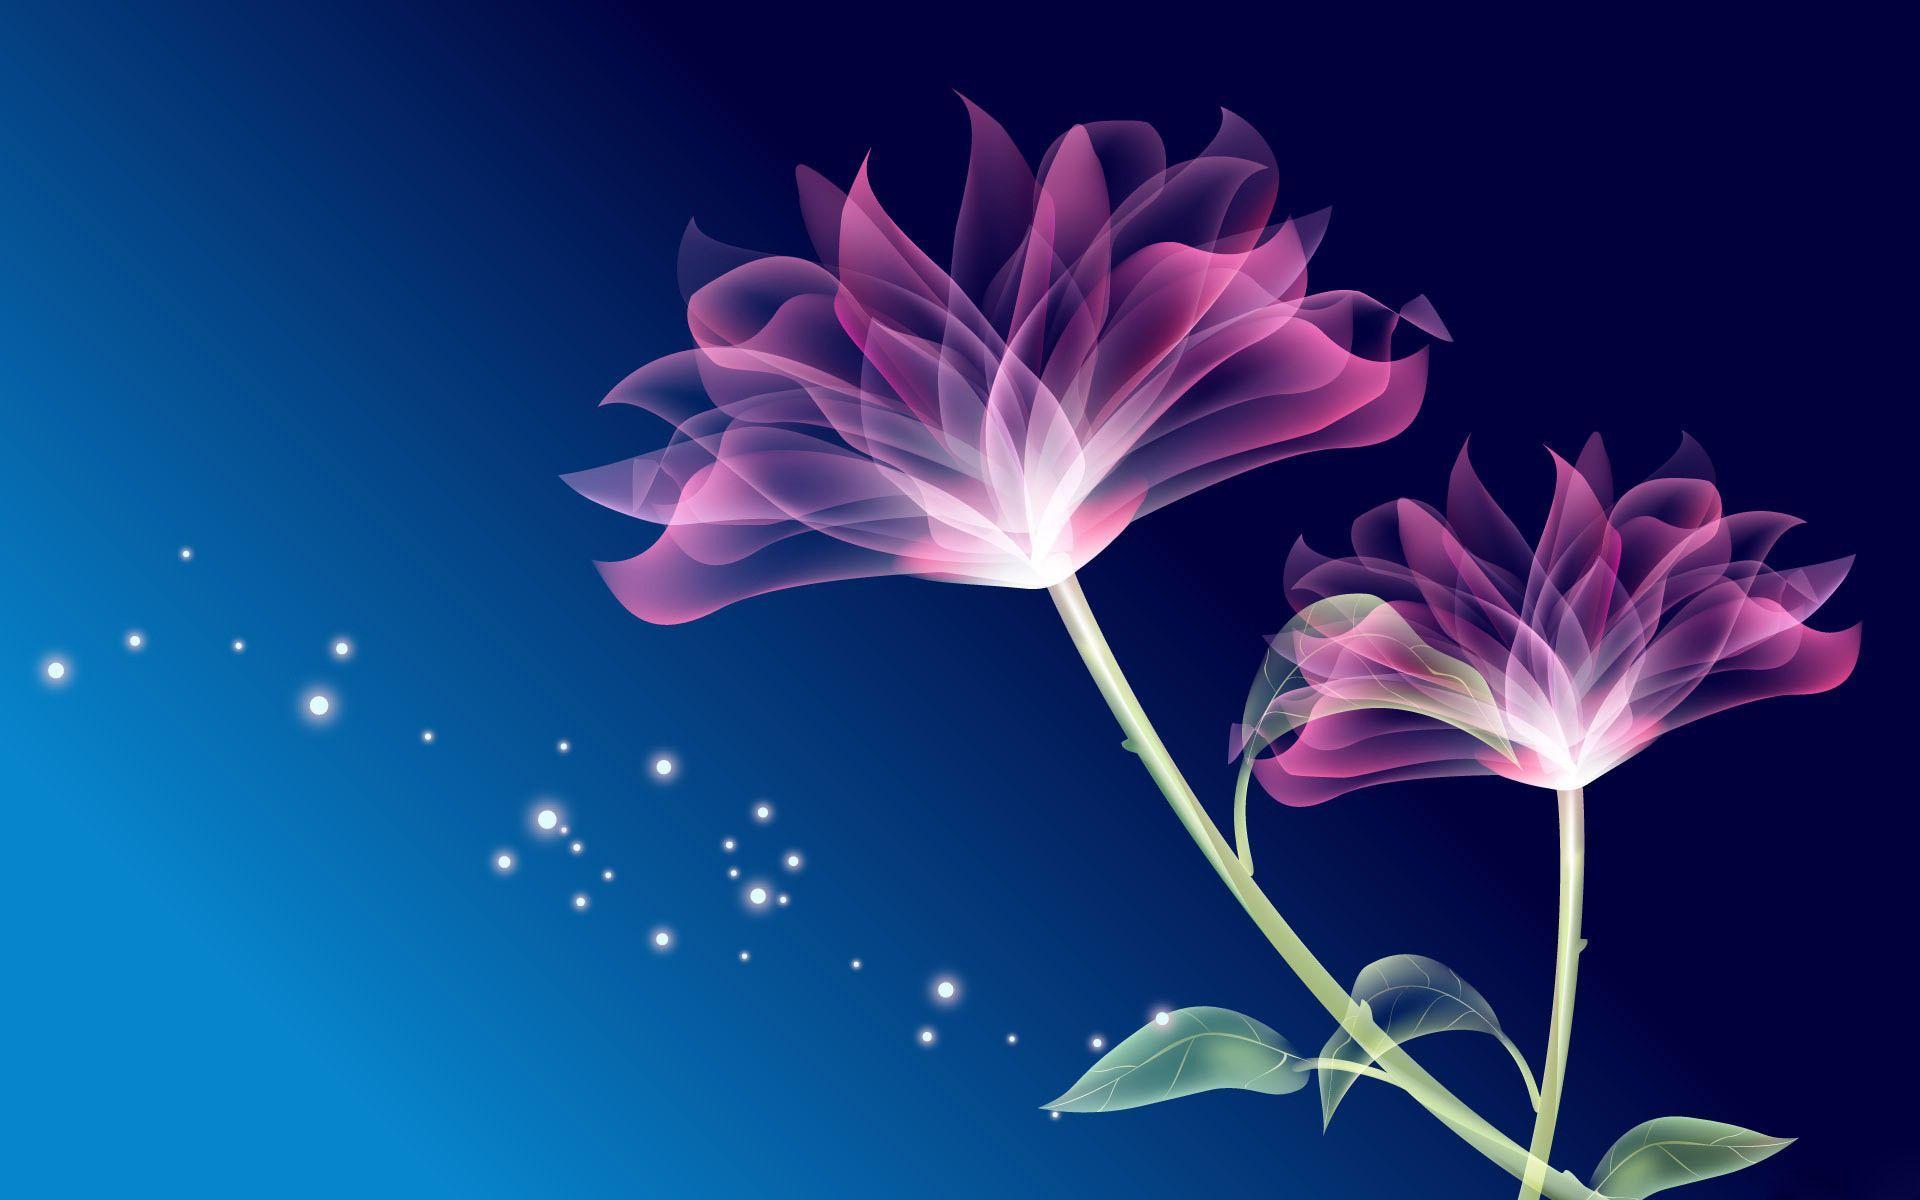 wallpaper flowers fantasy free windows - Image And Wallpaper